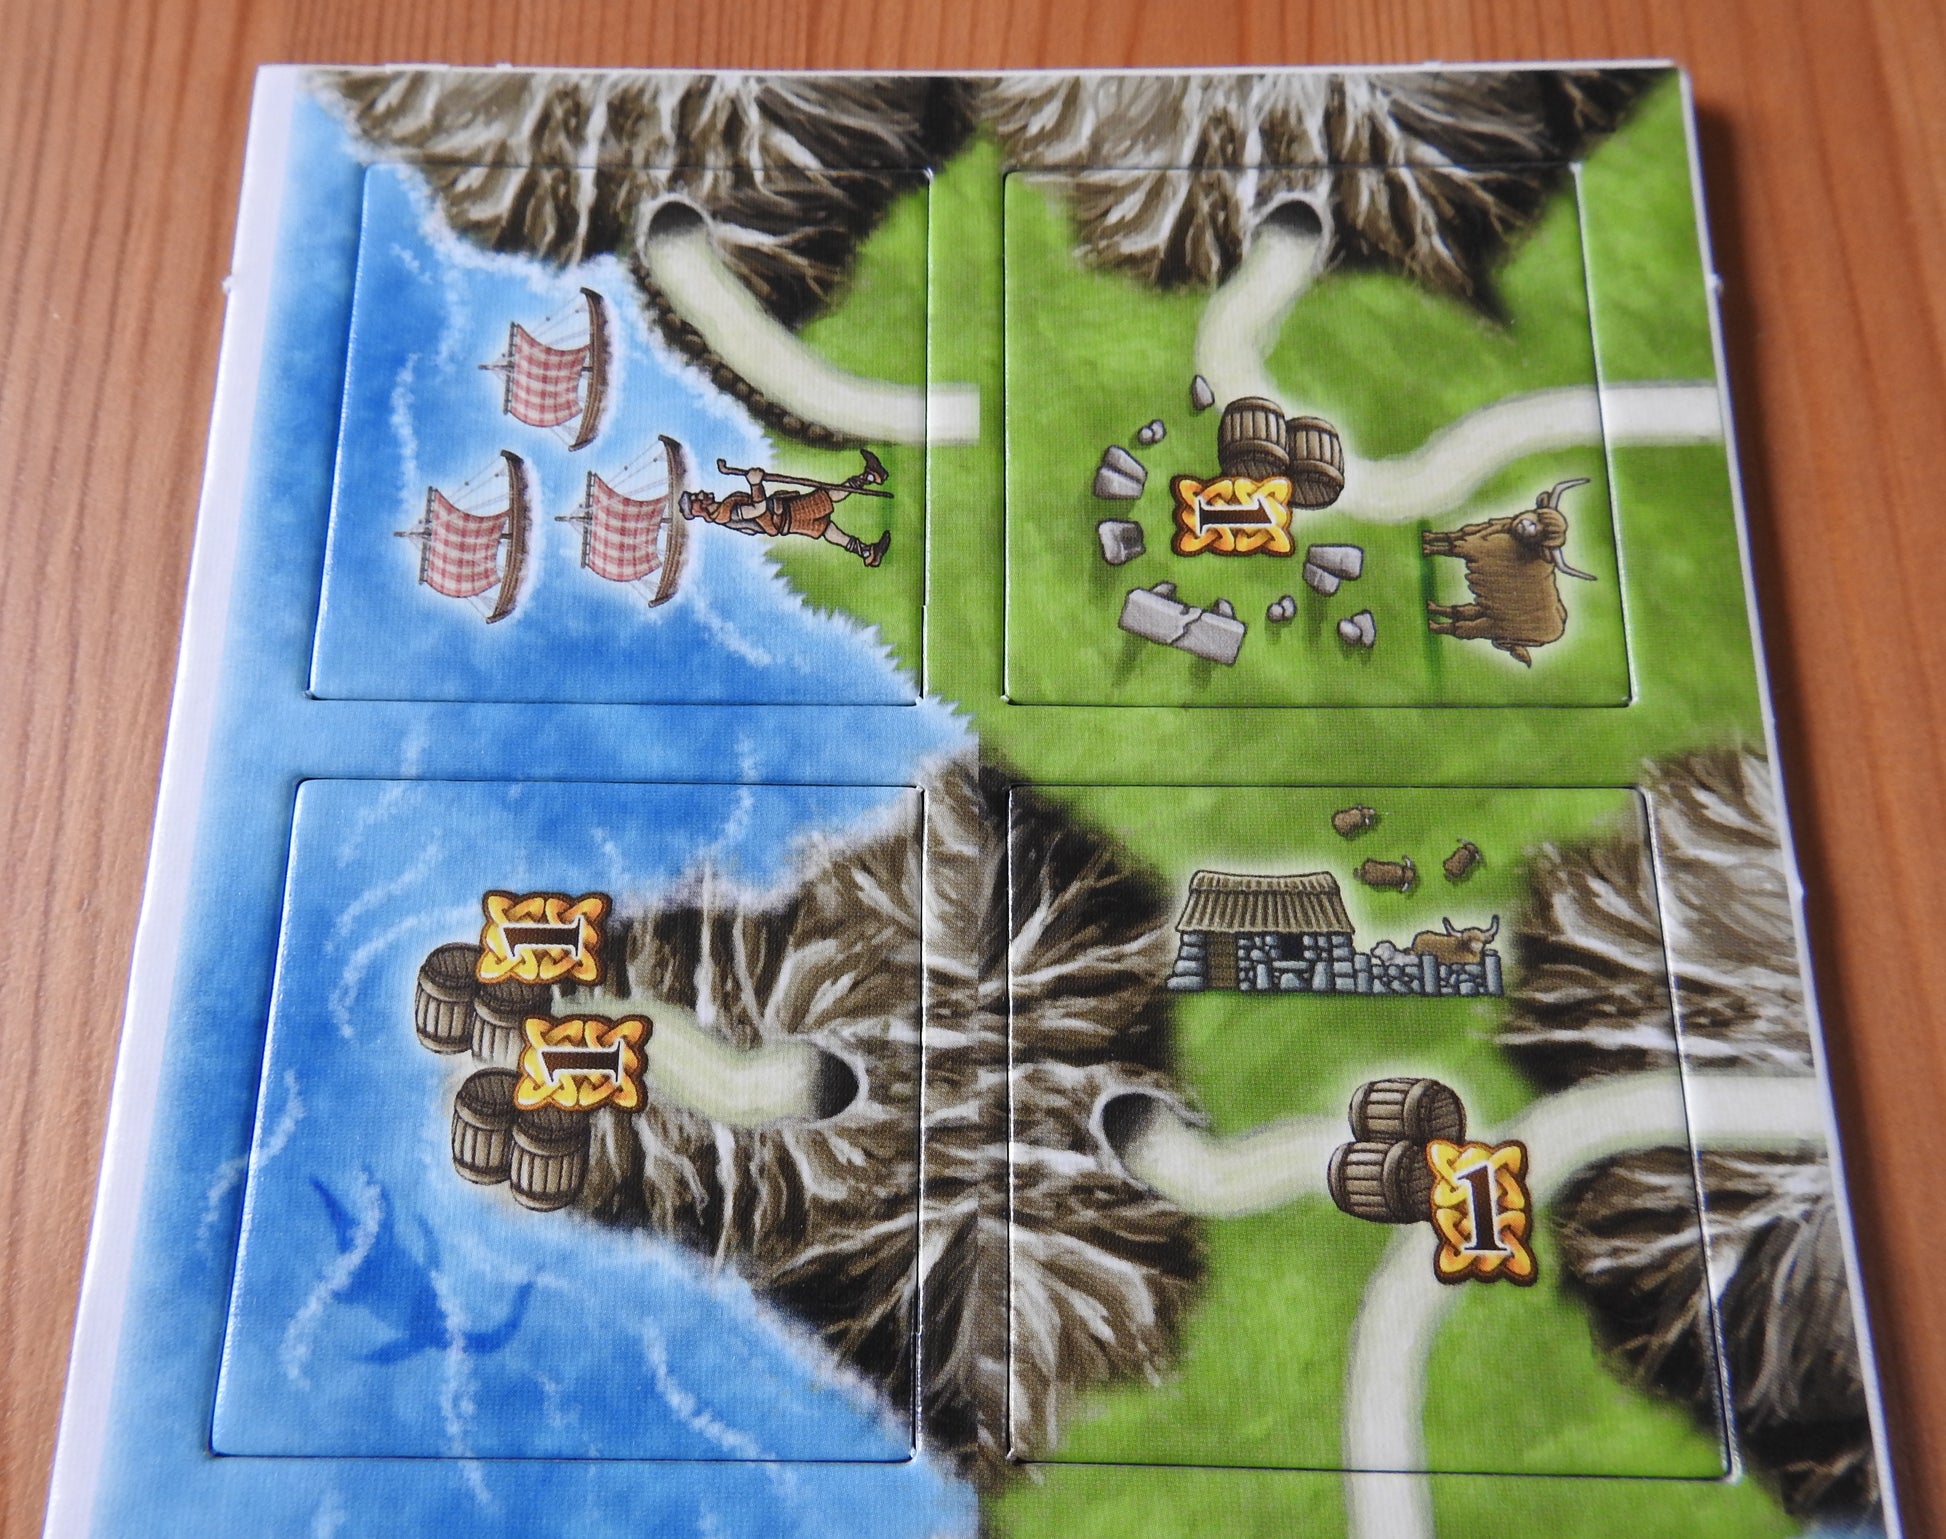 A closer look at some of the included tiles, featuring tunnels, boats and whisky barrels!